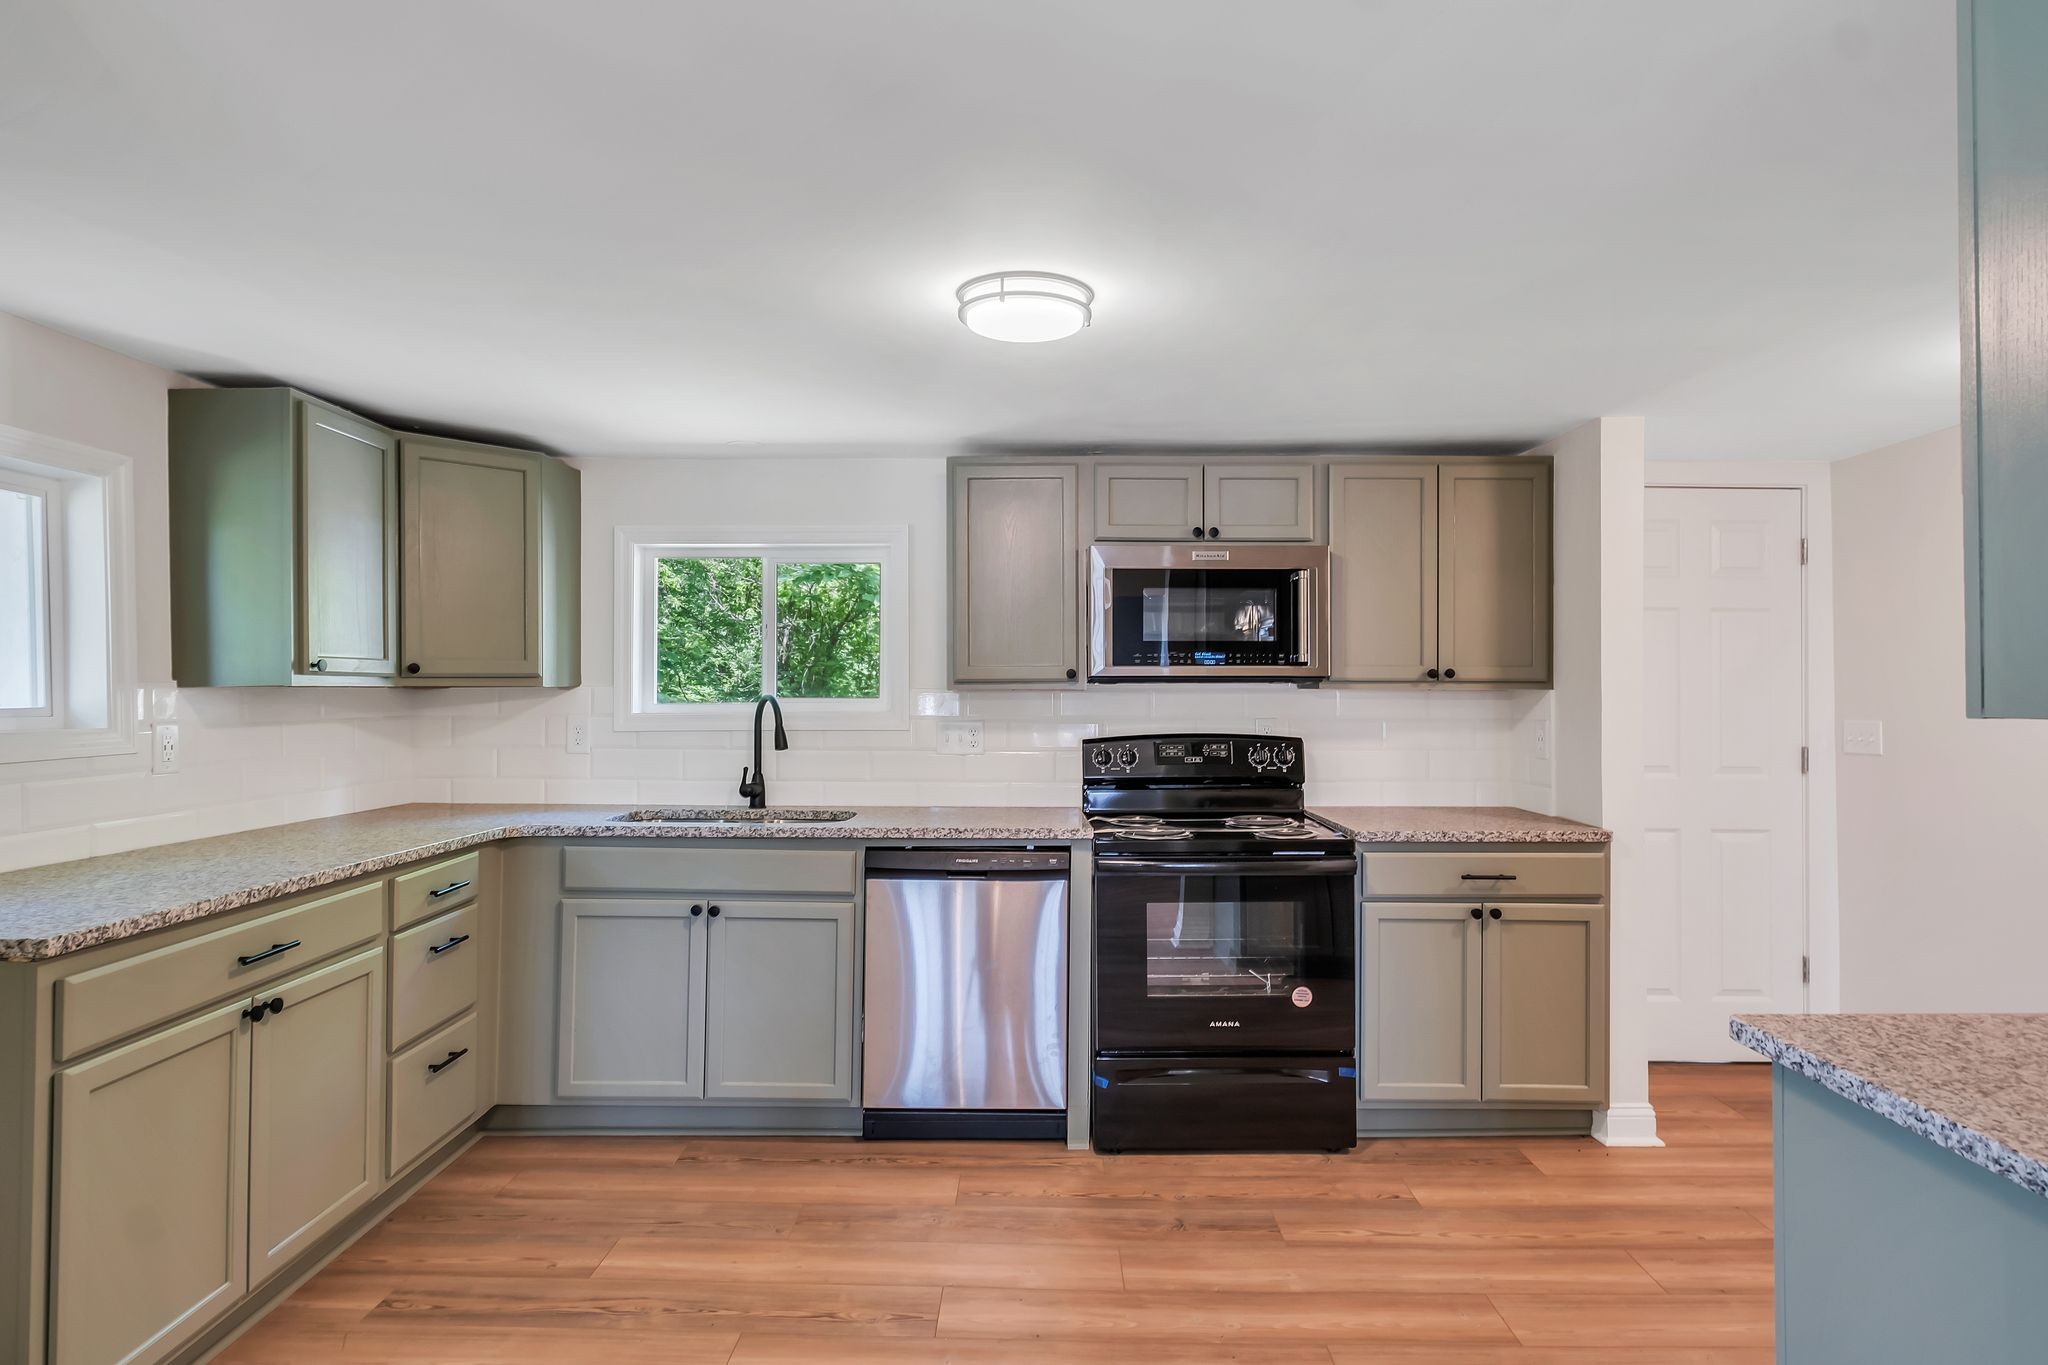 a kitchen with stainless steel appliances granite countertop a stove top oven a sink and dishwasher with wooden floor